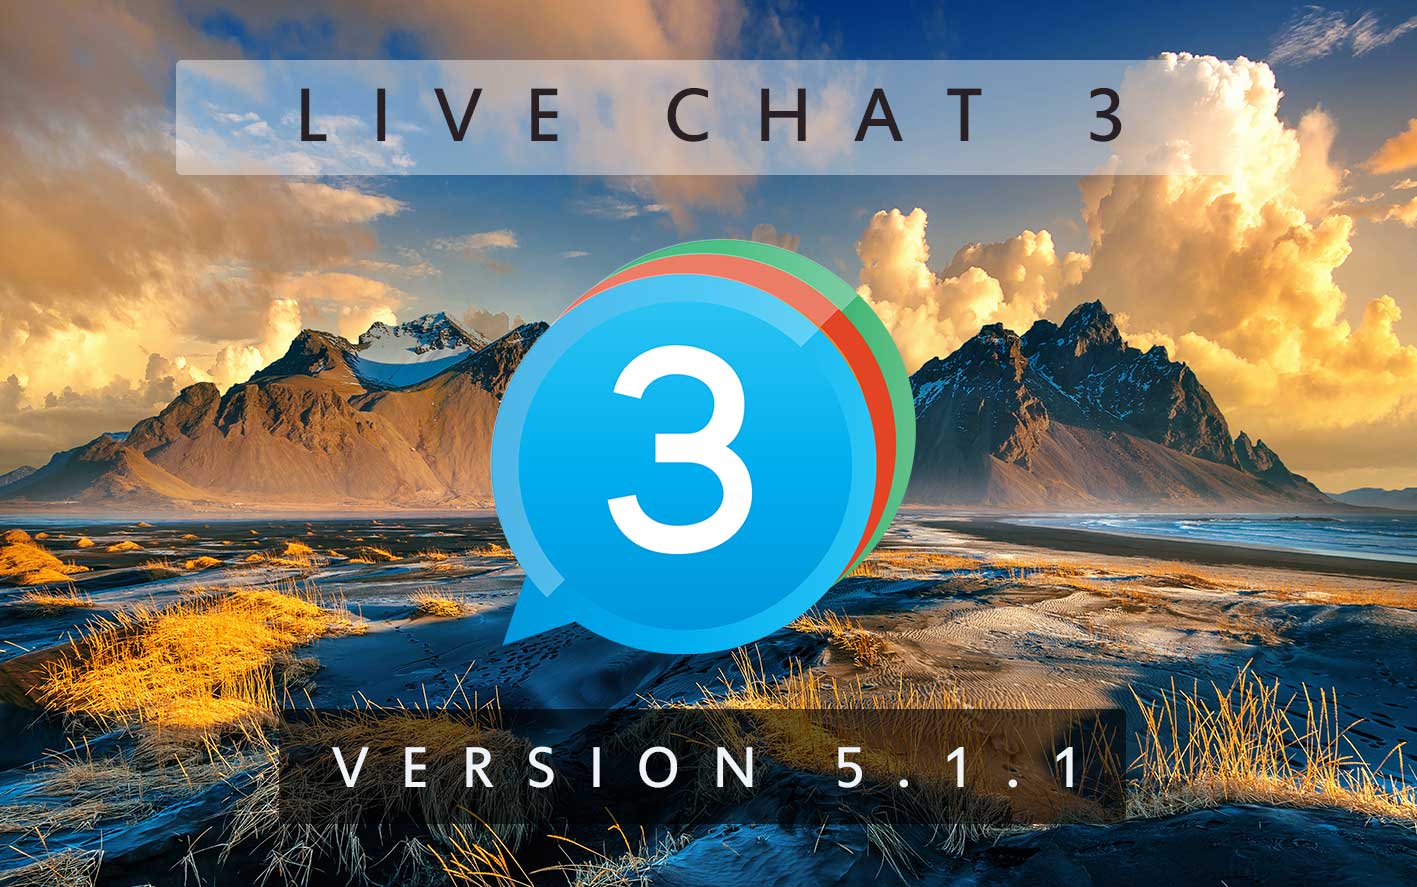 Live Chat 3 - Version 5.1.1